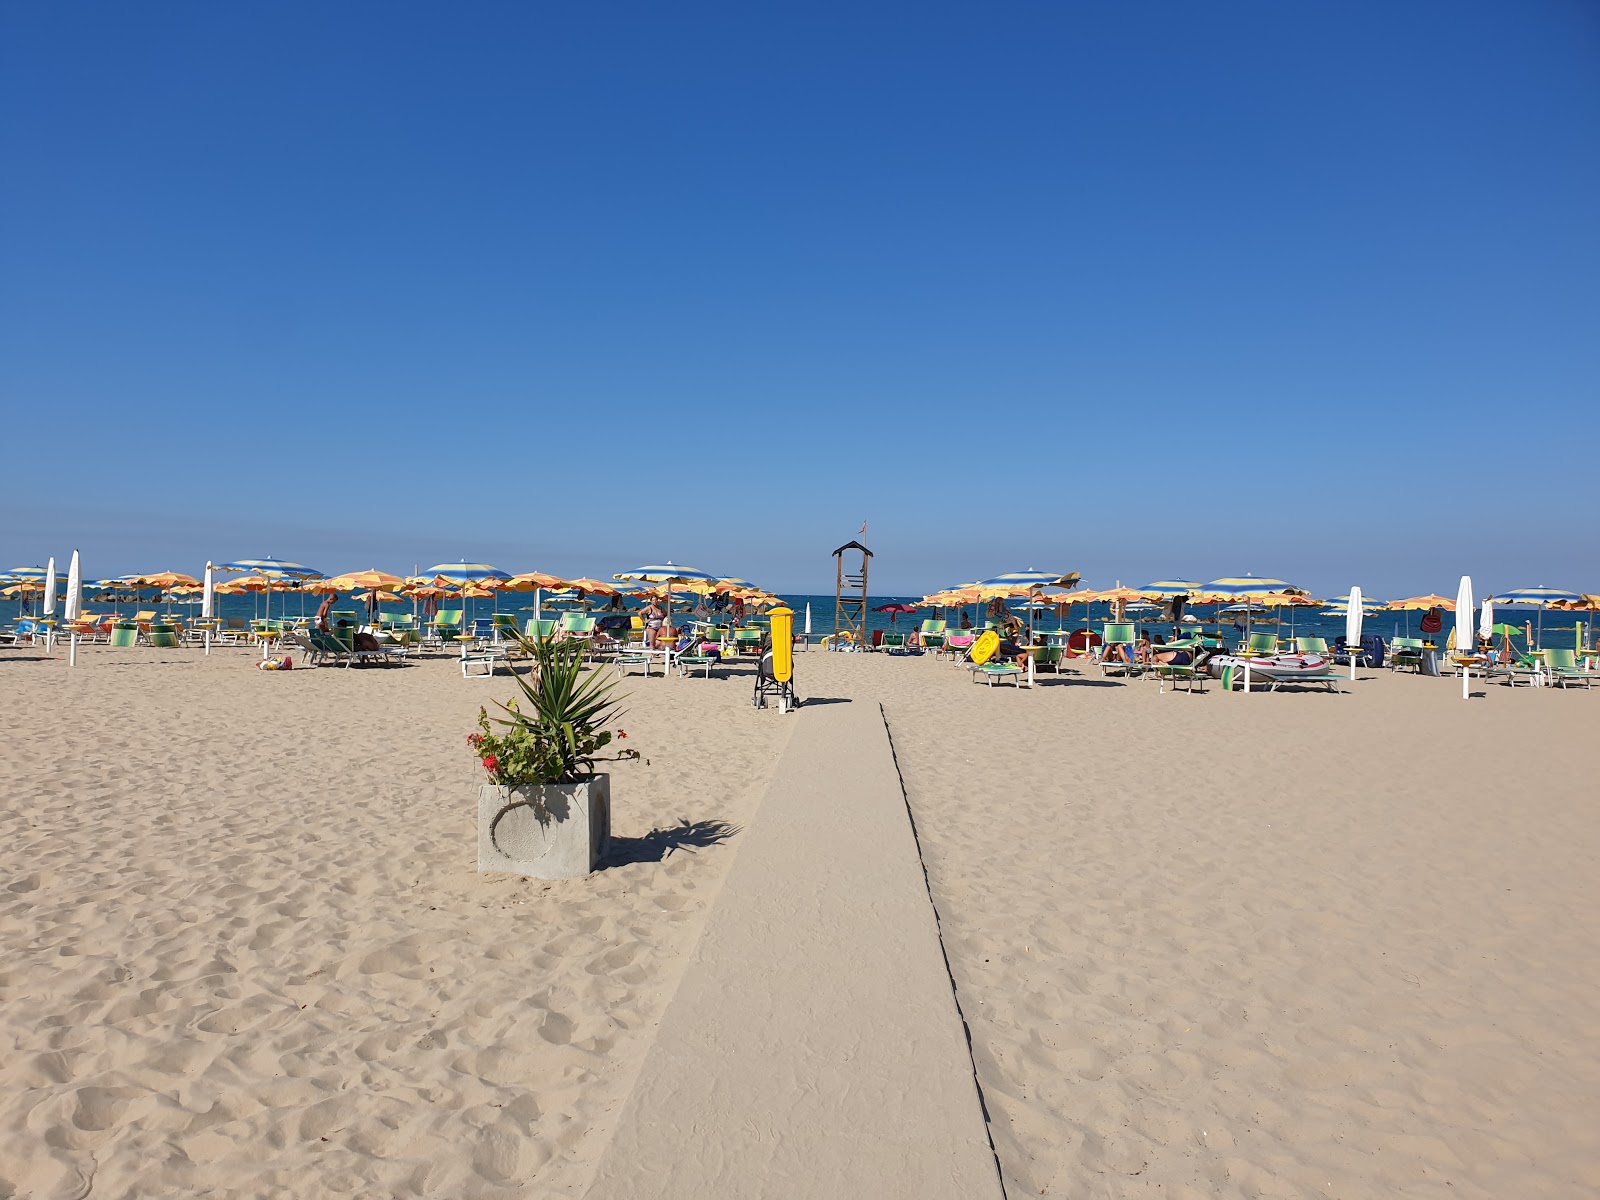 Foto af Spiaggia di Campomarino med turkis rent vand overflade